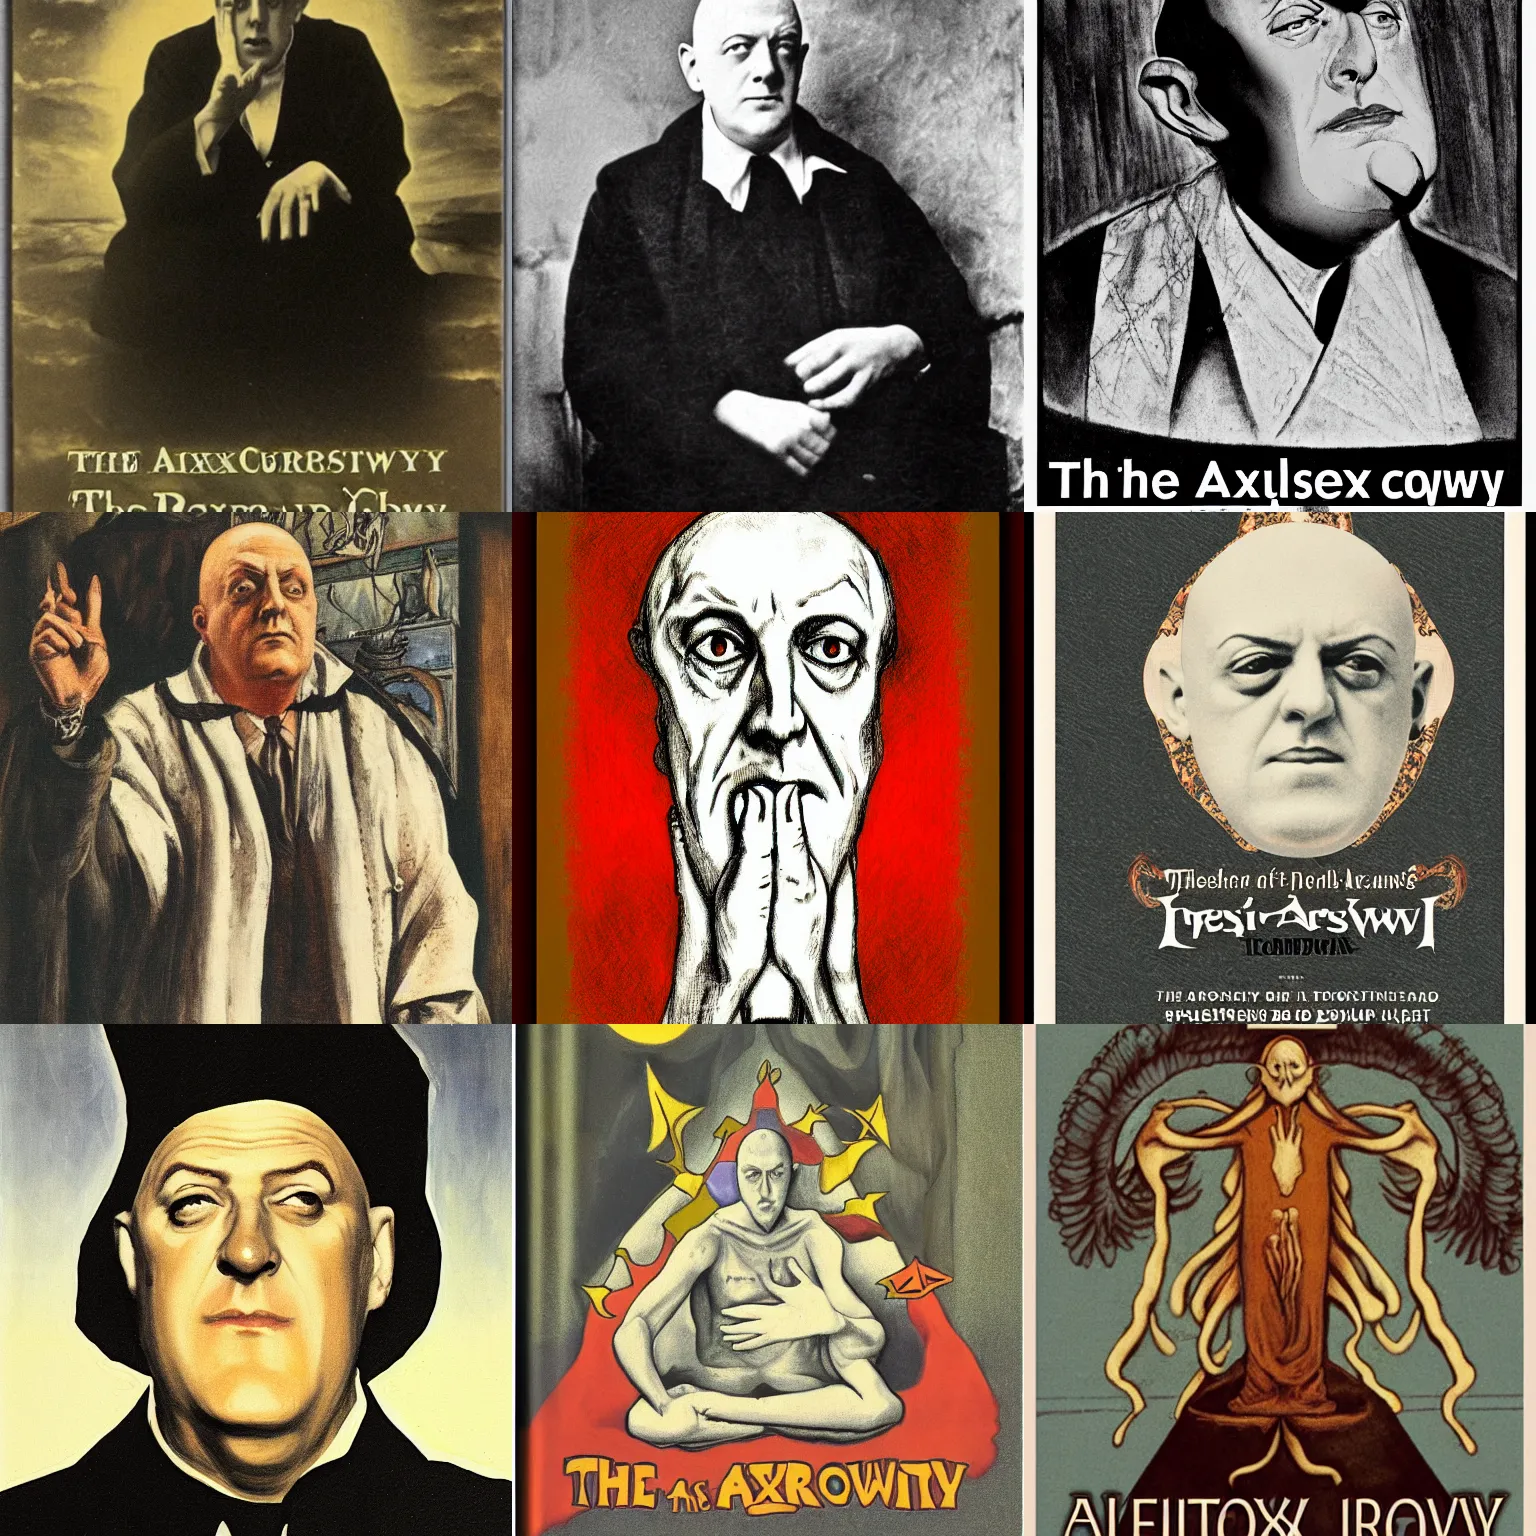 Prompt: the anxious by aleister crowley